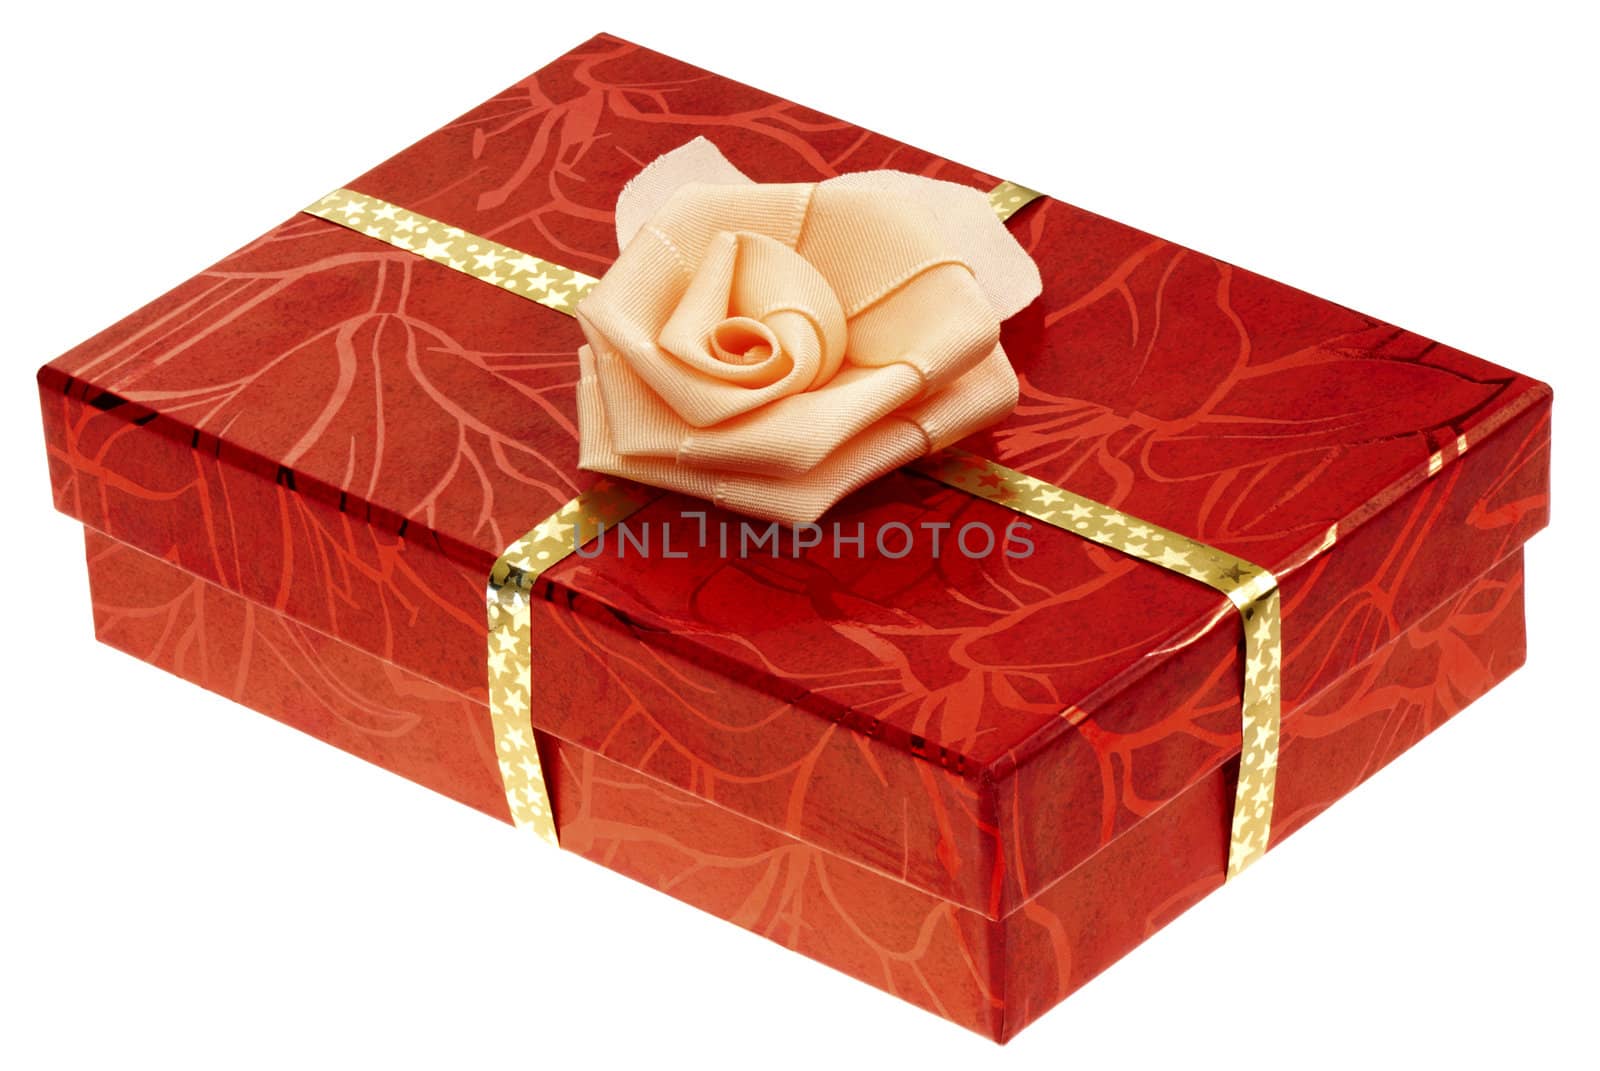 A red boxed gift with rose ribbon by Kamensky